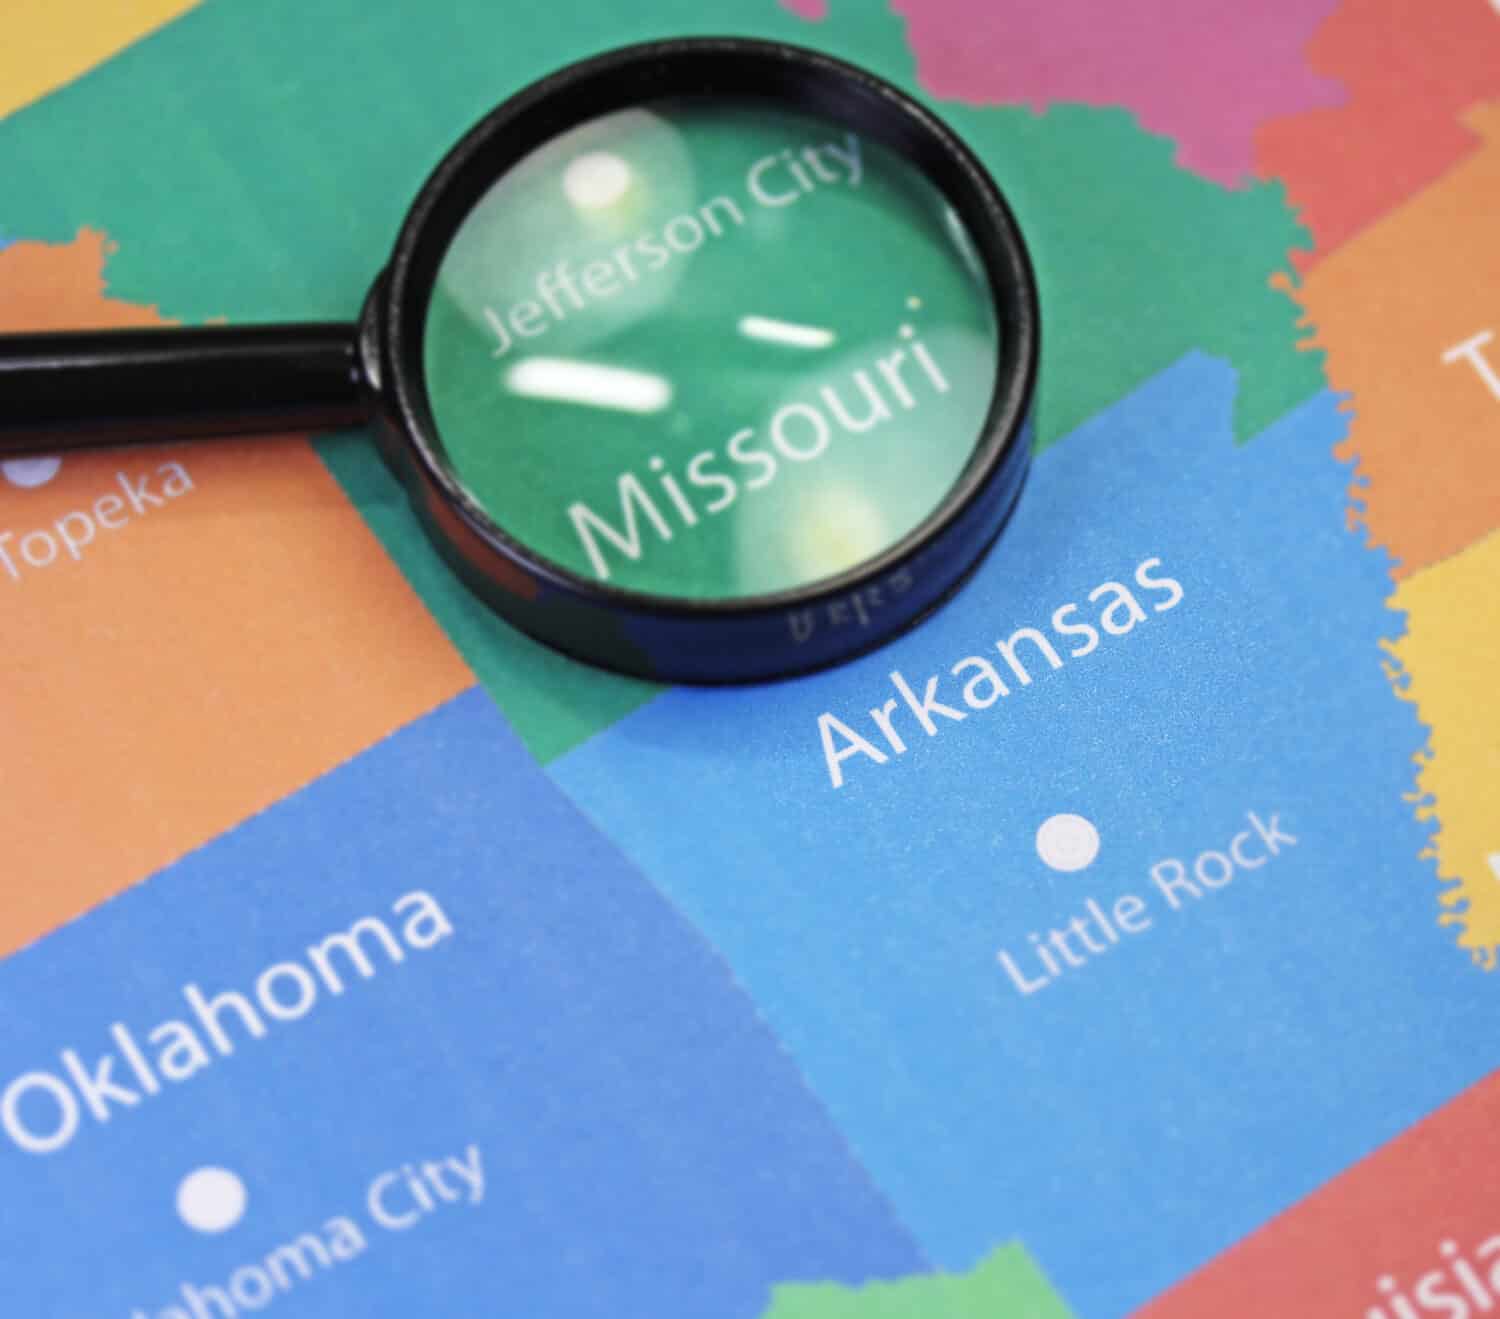 Missouri map close up with magnifier